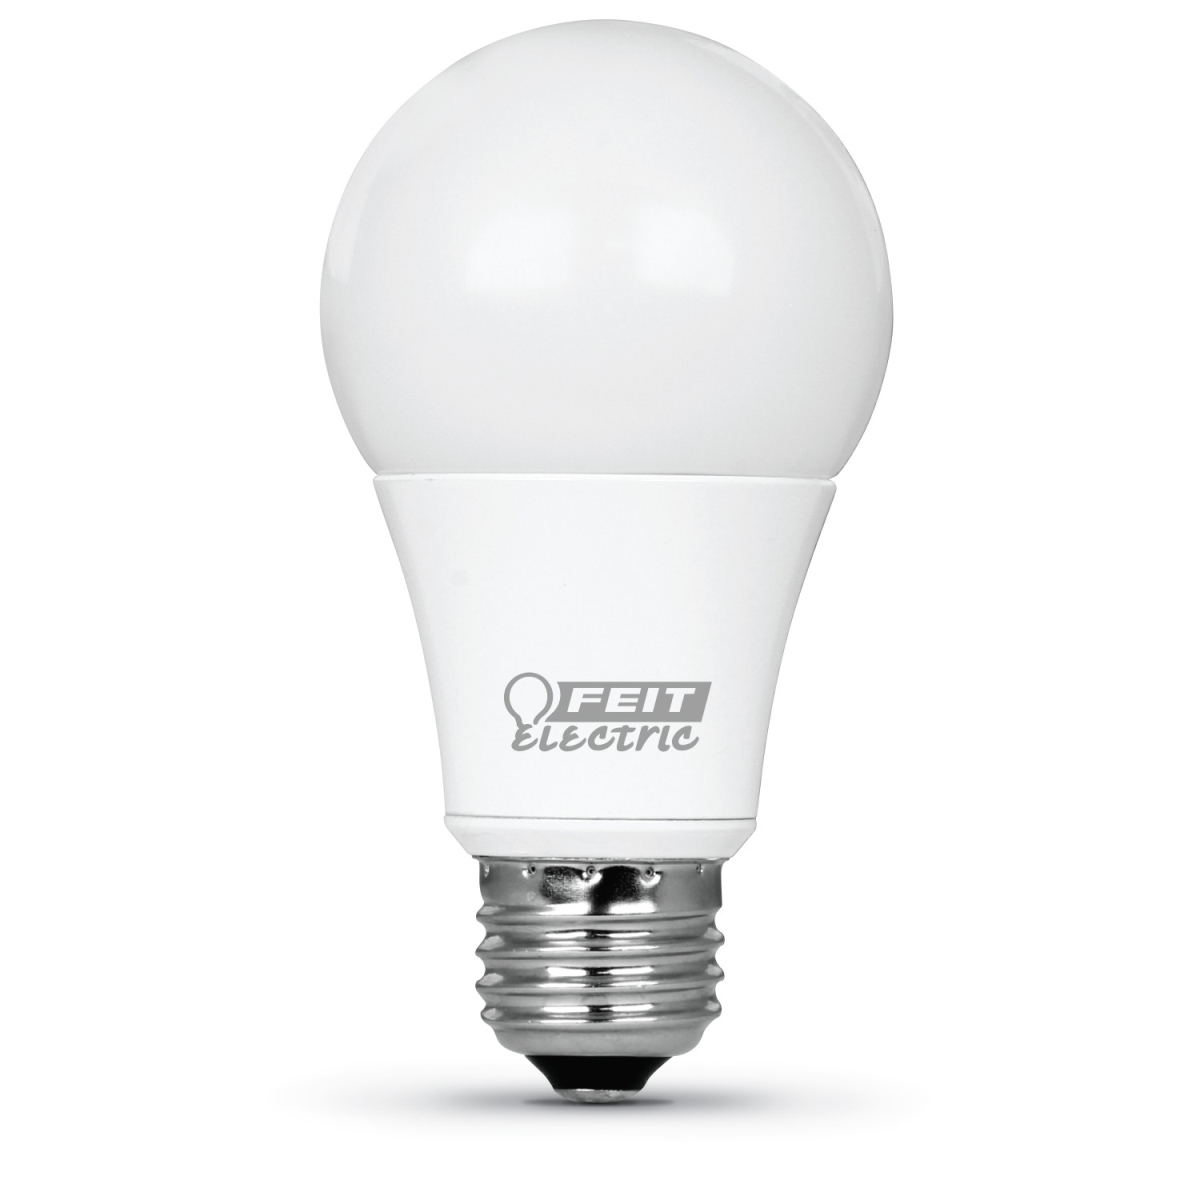 Picture of Feit Electric 272922 60W 800 Lumens A19 Dimmable LED Bulb - 5K